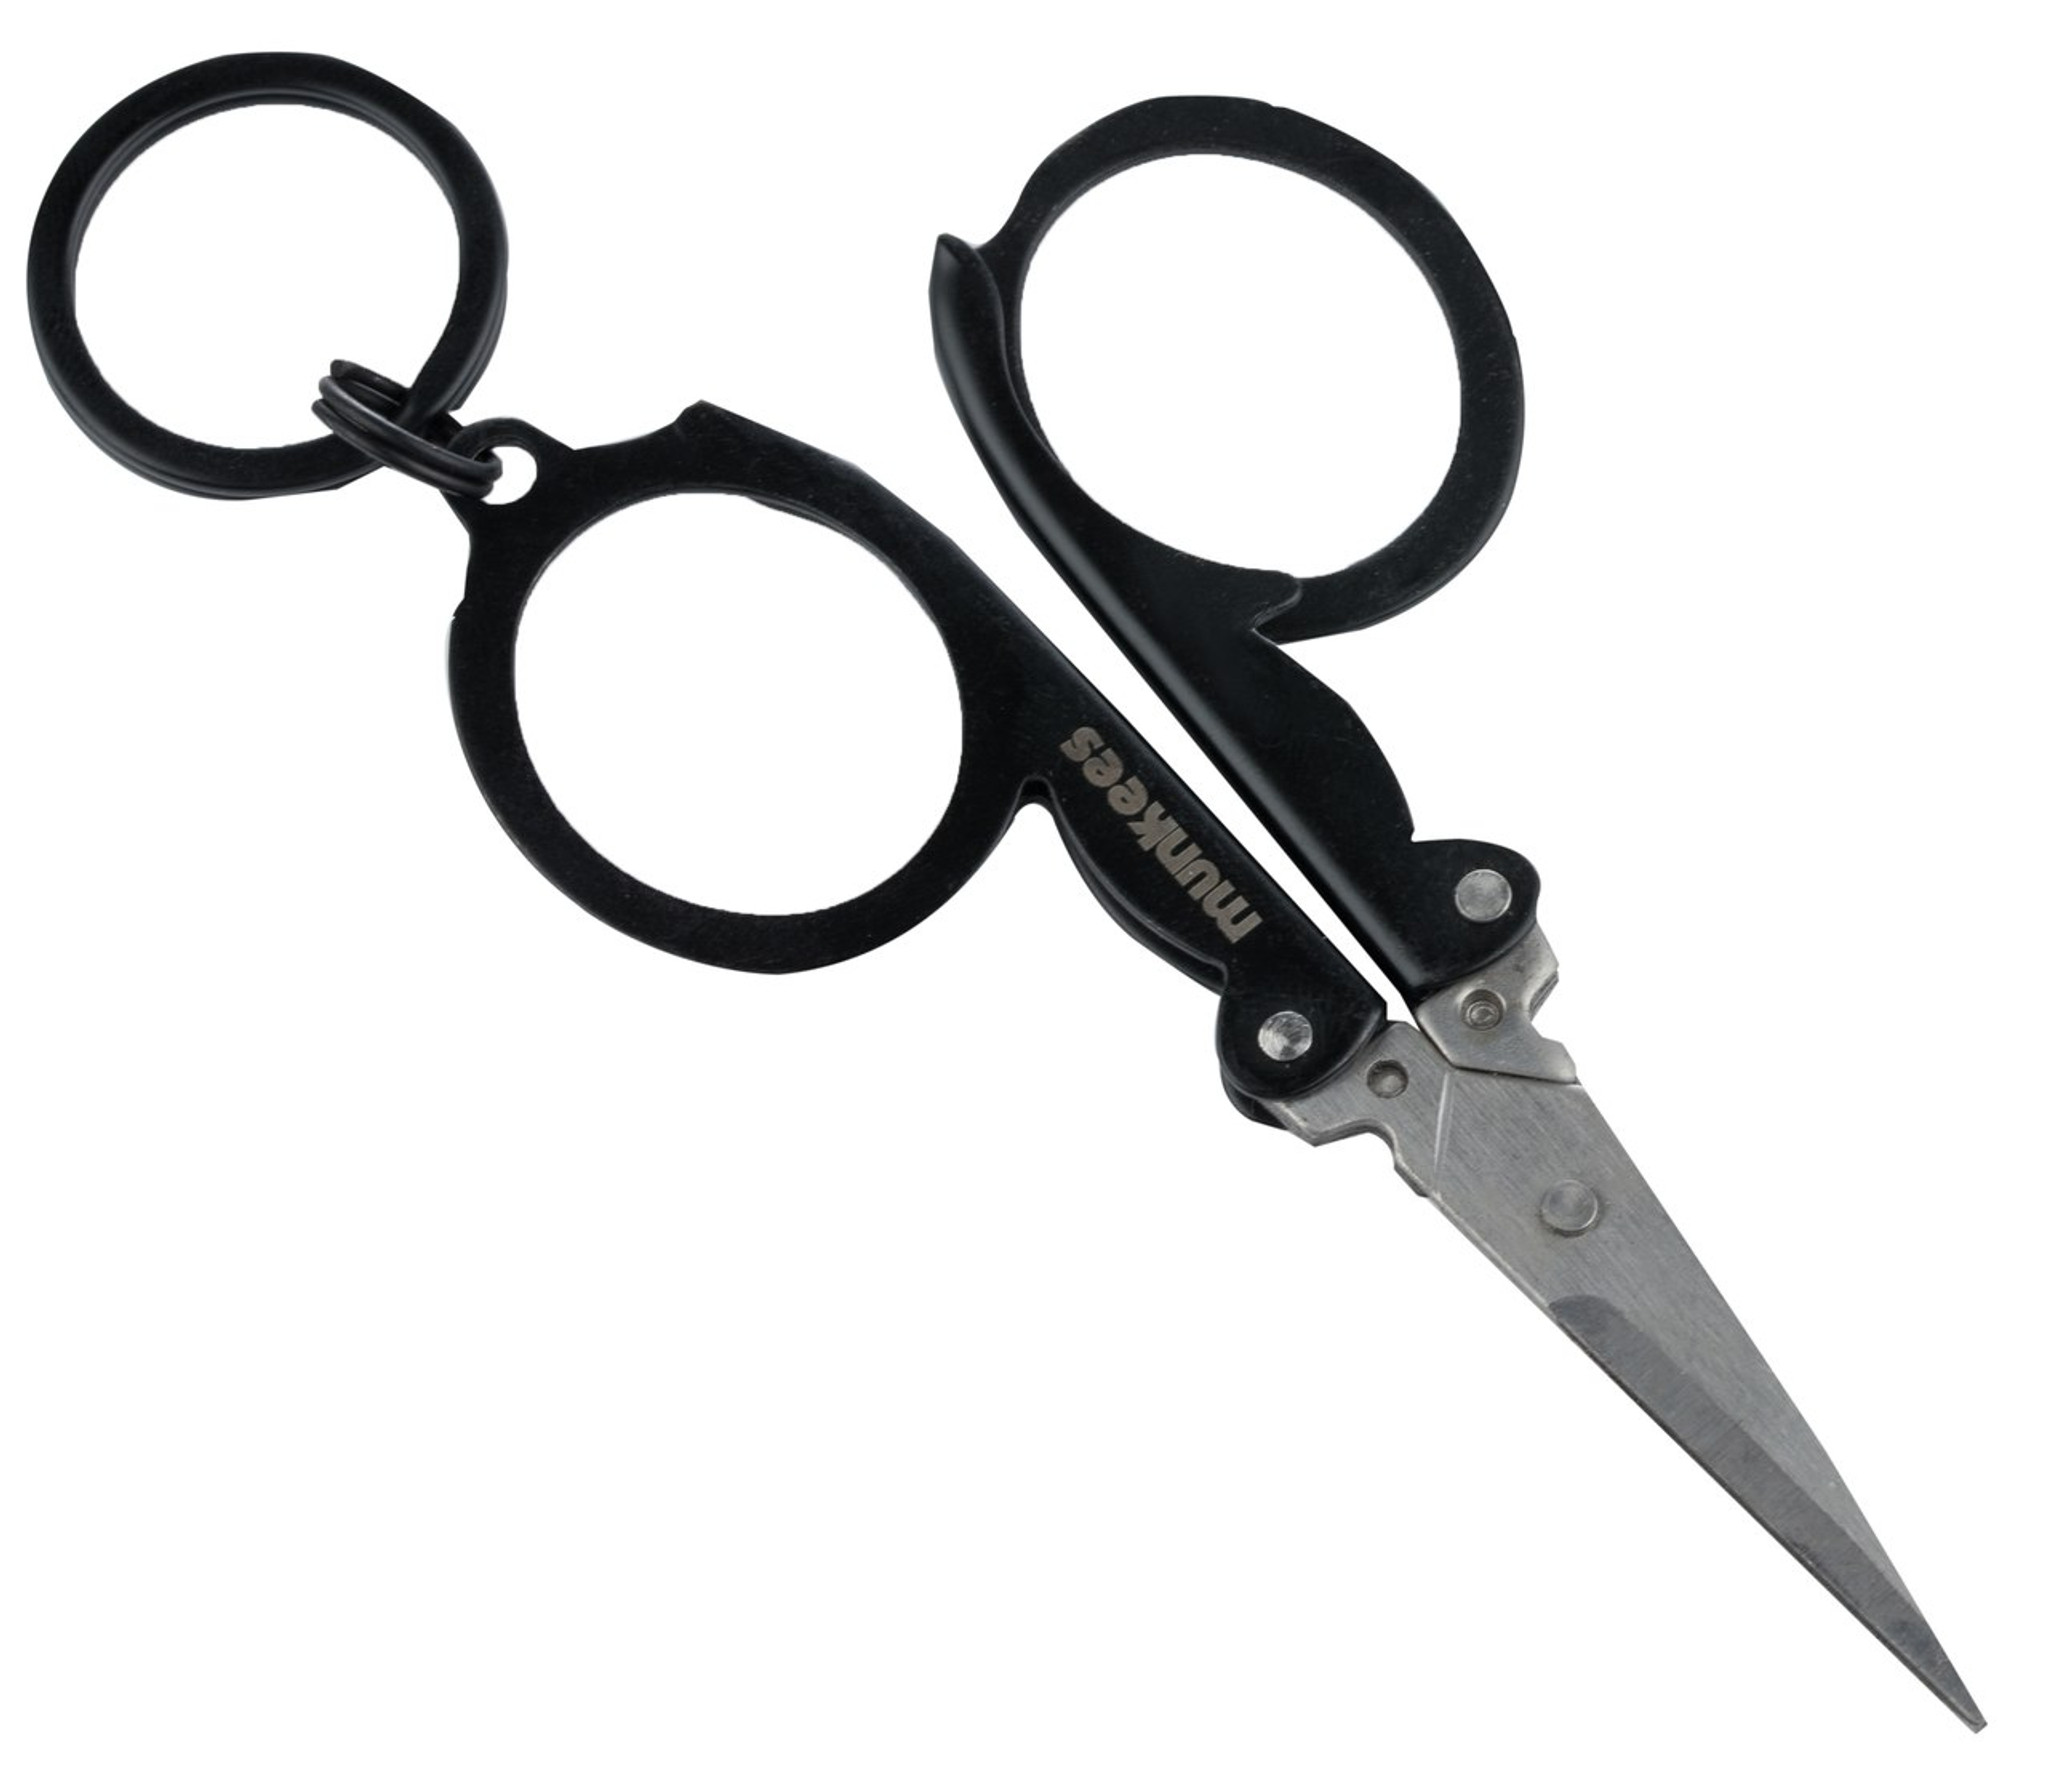 2 Pcs Folding Scissors,Safe Portable Keychain Travel Scissors,Zinc Alloy  Handle Stainless Steel Retractable Knife for Home Office